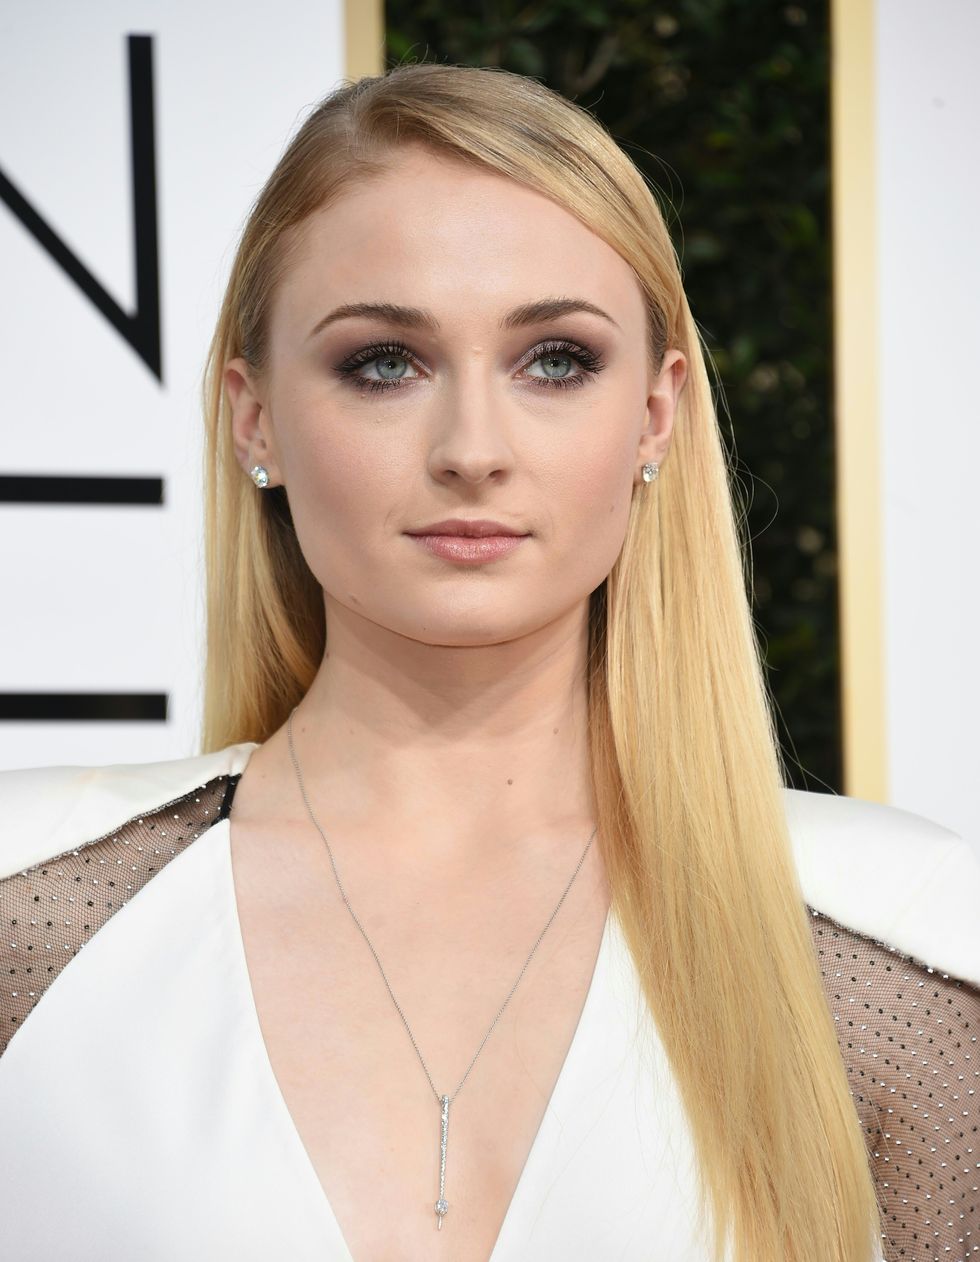 Sophie Turner arrives at the 74th annual Golden Globe Awards, January 8, 2017, at the Beverly Hilton Hotel in Beverly Hills, California.  / AFP / VALERIE MACON        (Photo credit should read VALERIE MACON/AFP/Getty Images)